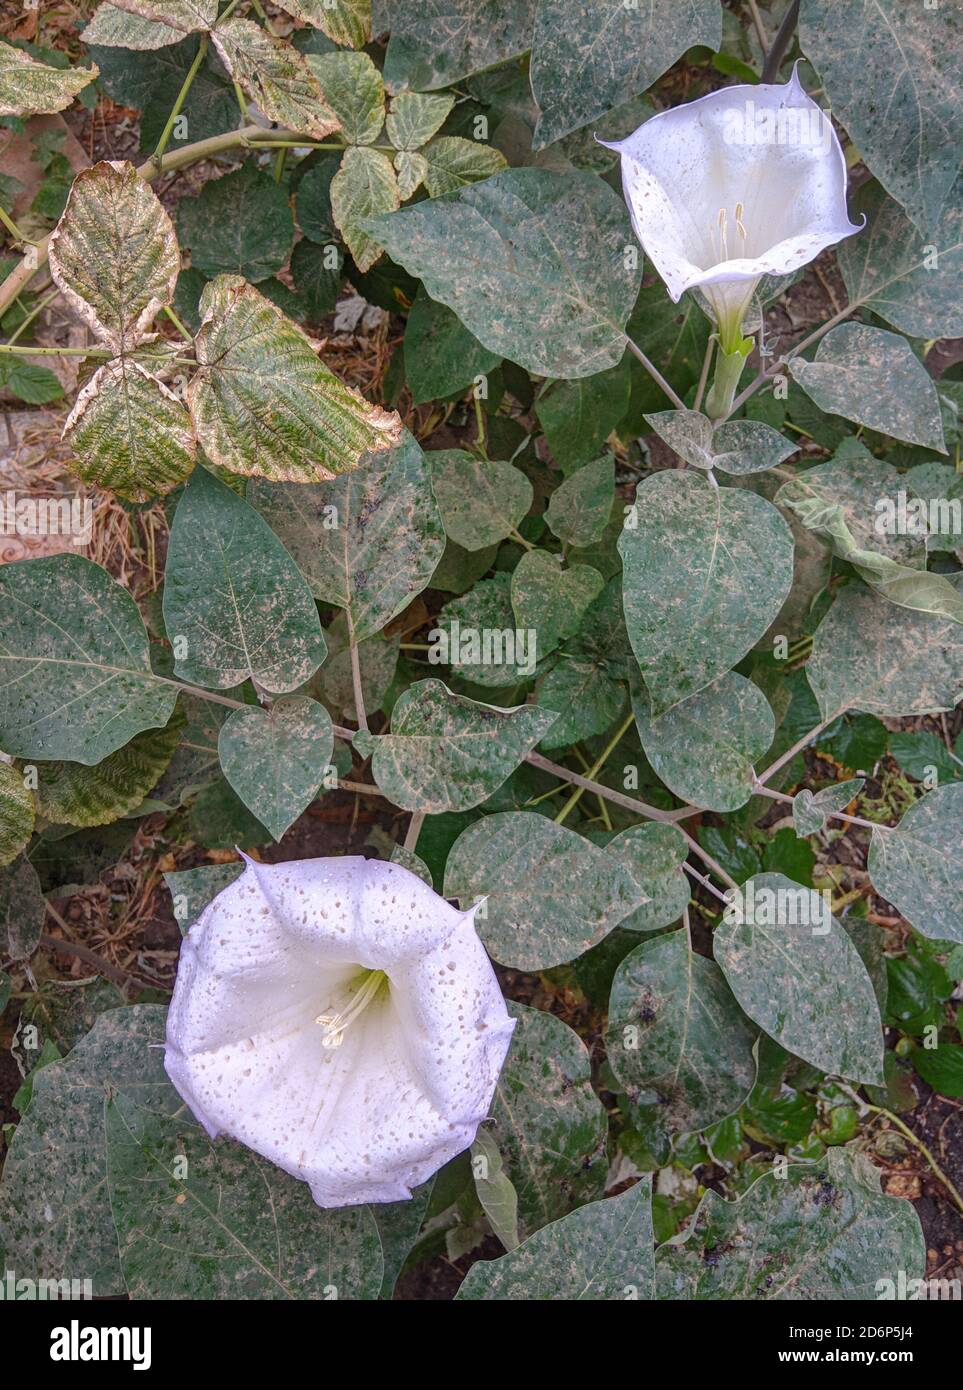 one white sacred datura wrightii flower Closeup open blooming in garden Stock Photo